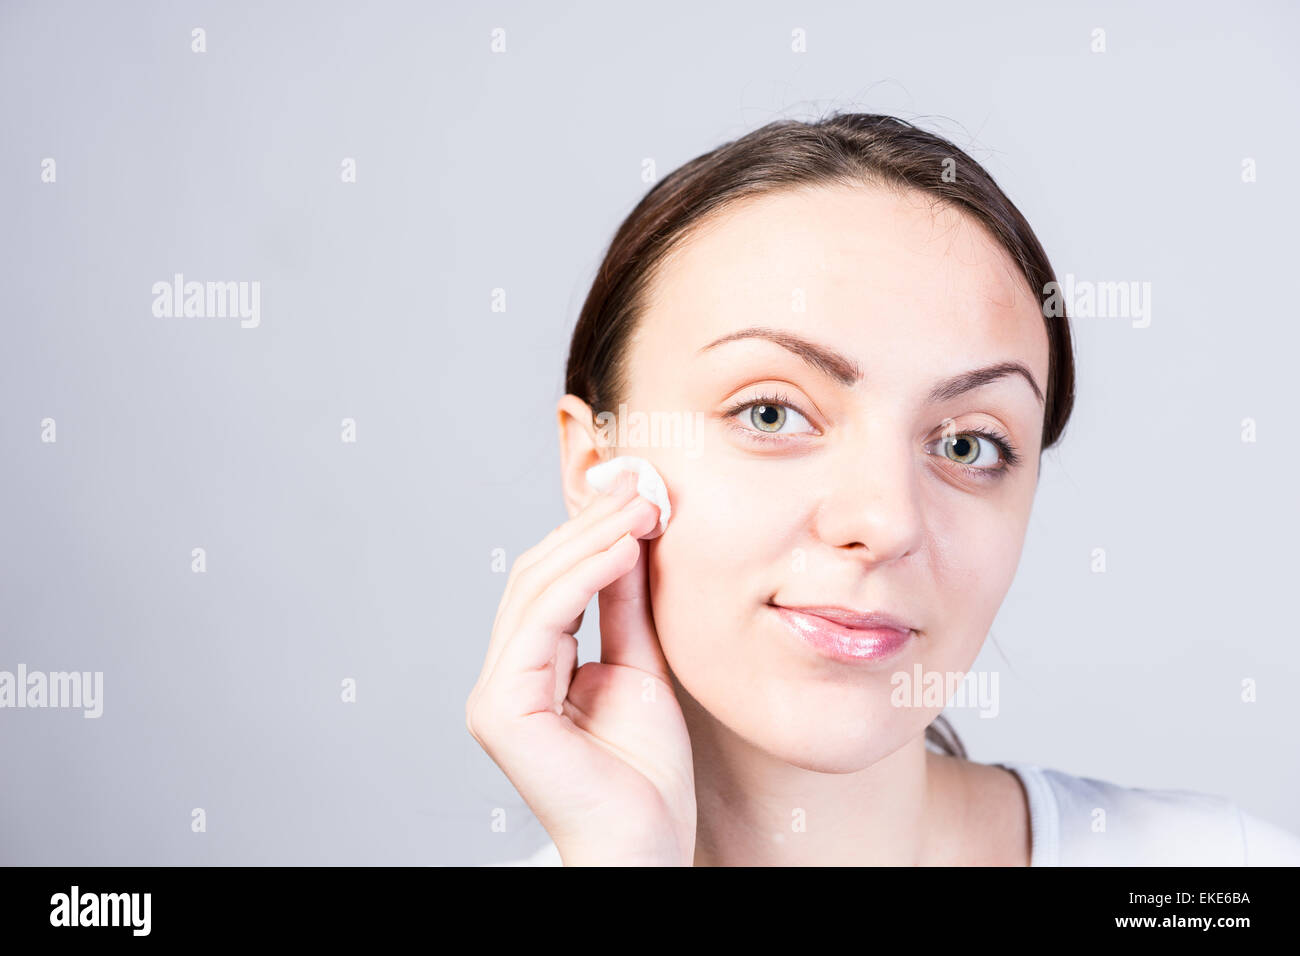 Close up Portrait of a Smiling Young Woman Scrubbing her Face Using a Cotton with Facial Cleanser While Looking at the Camera. C Stock Photo